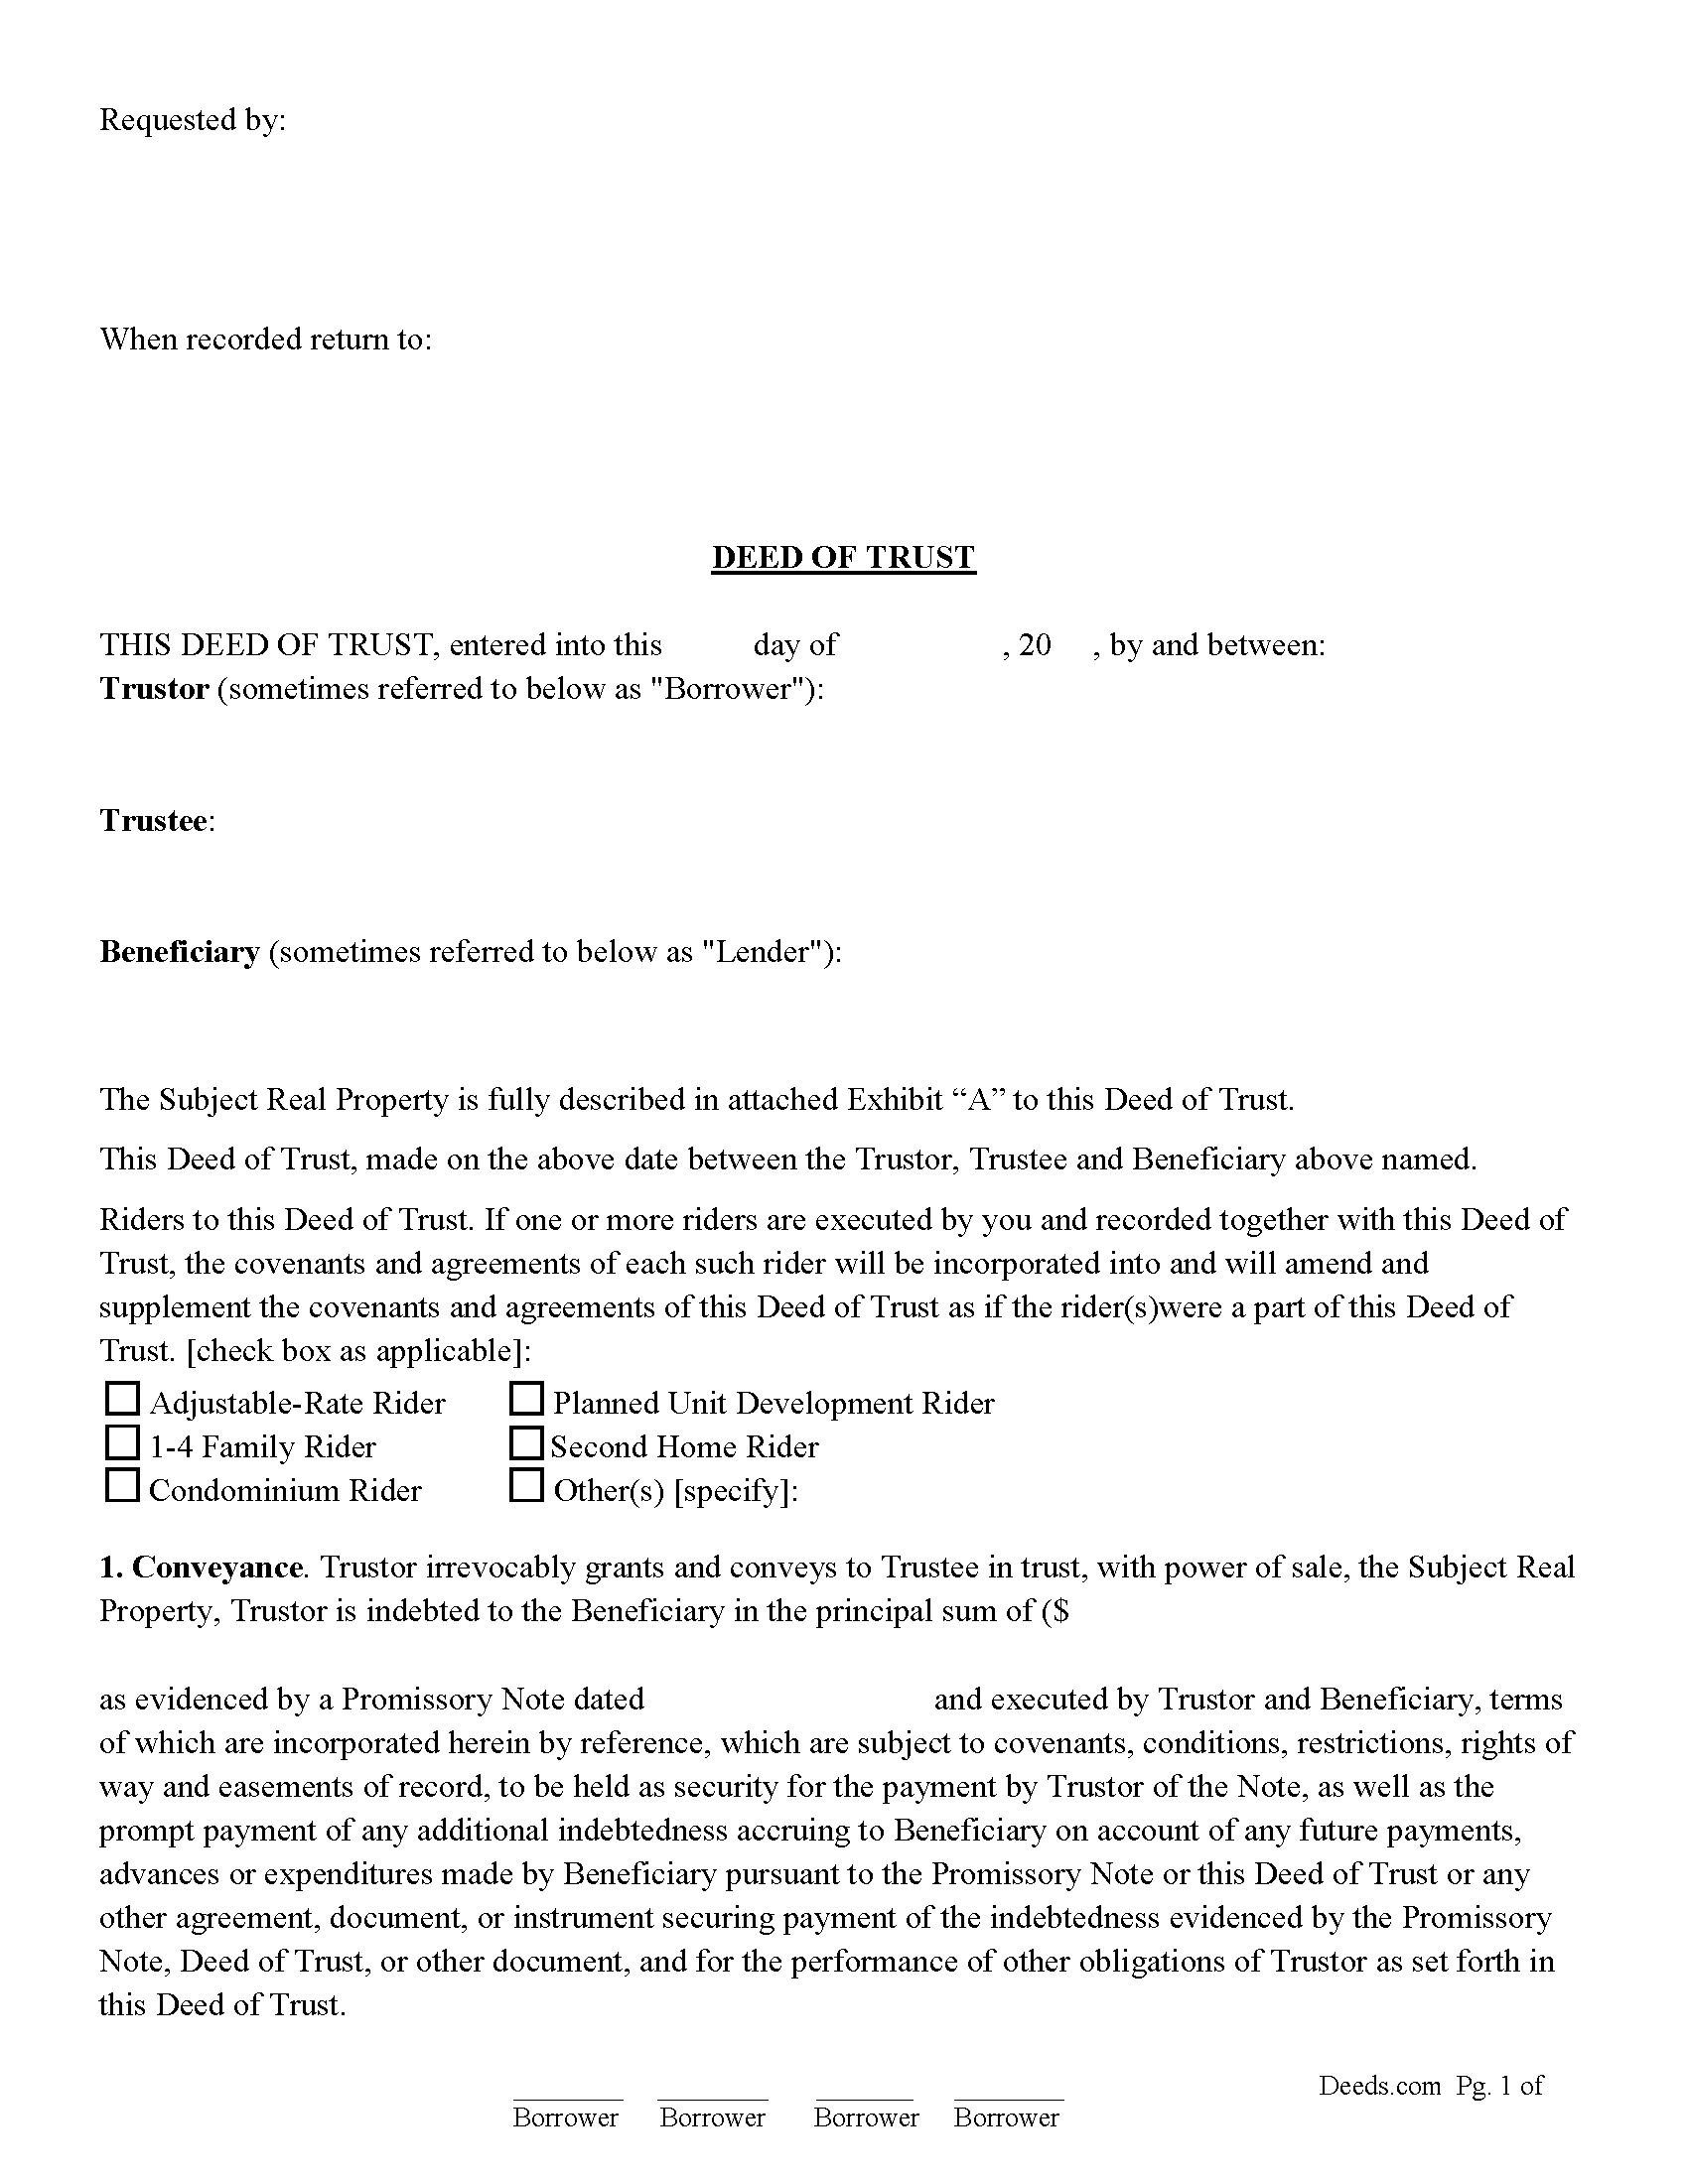 Deed of Trust Form